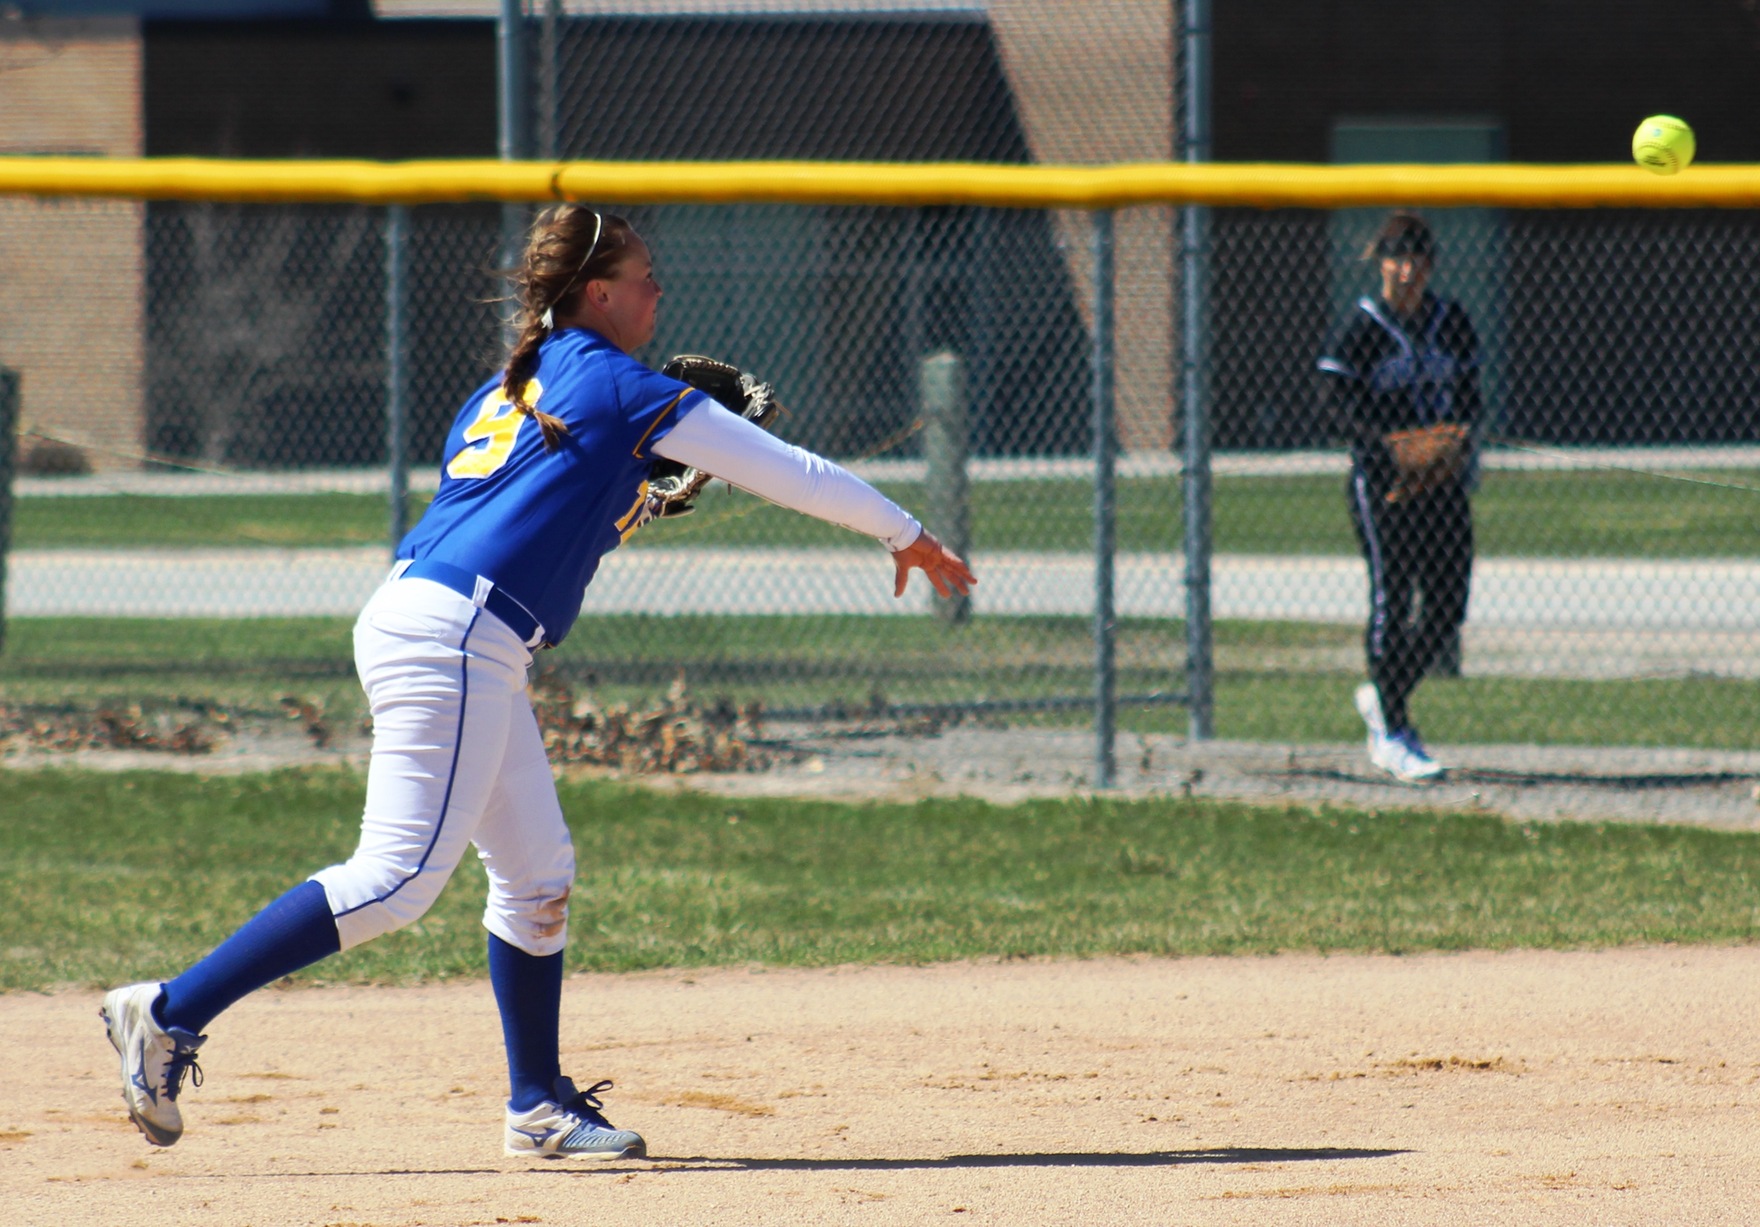 NIACC second baseman Brittany Florea throws out a runner at first base during the first game of an ICCAC doubleheader against DMACC on Thursday.